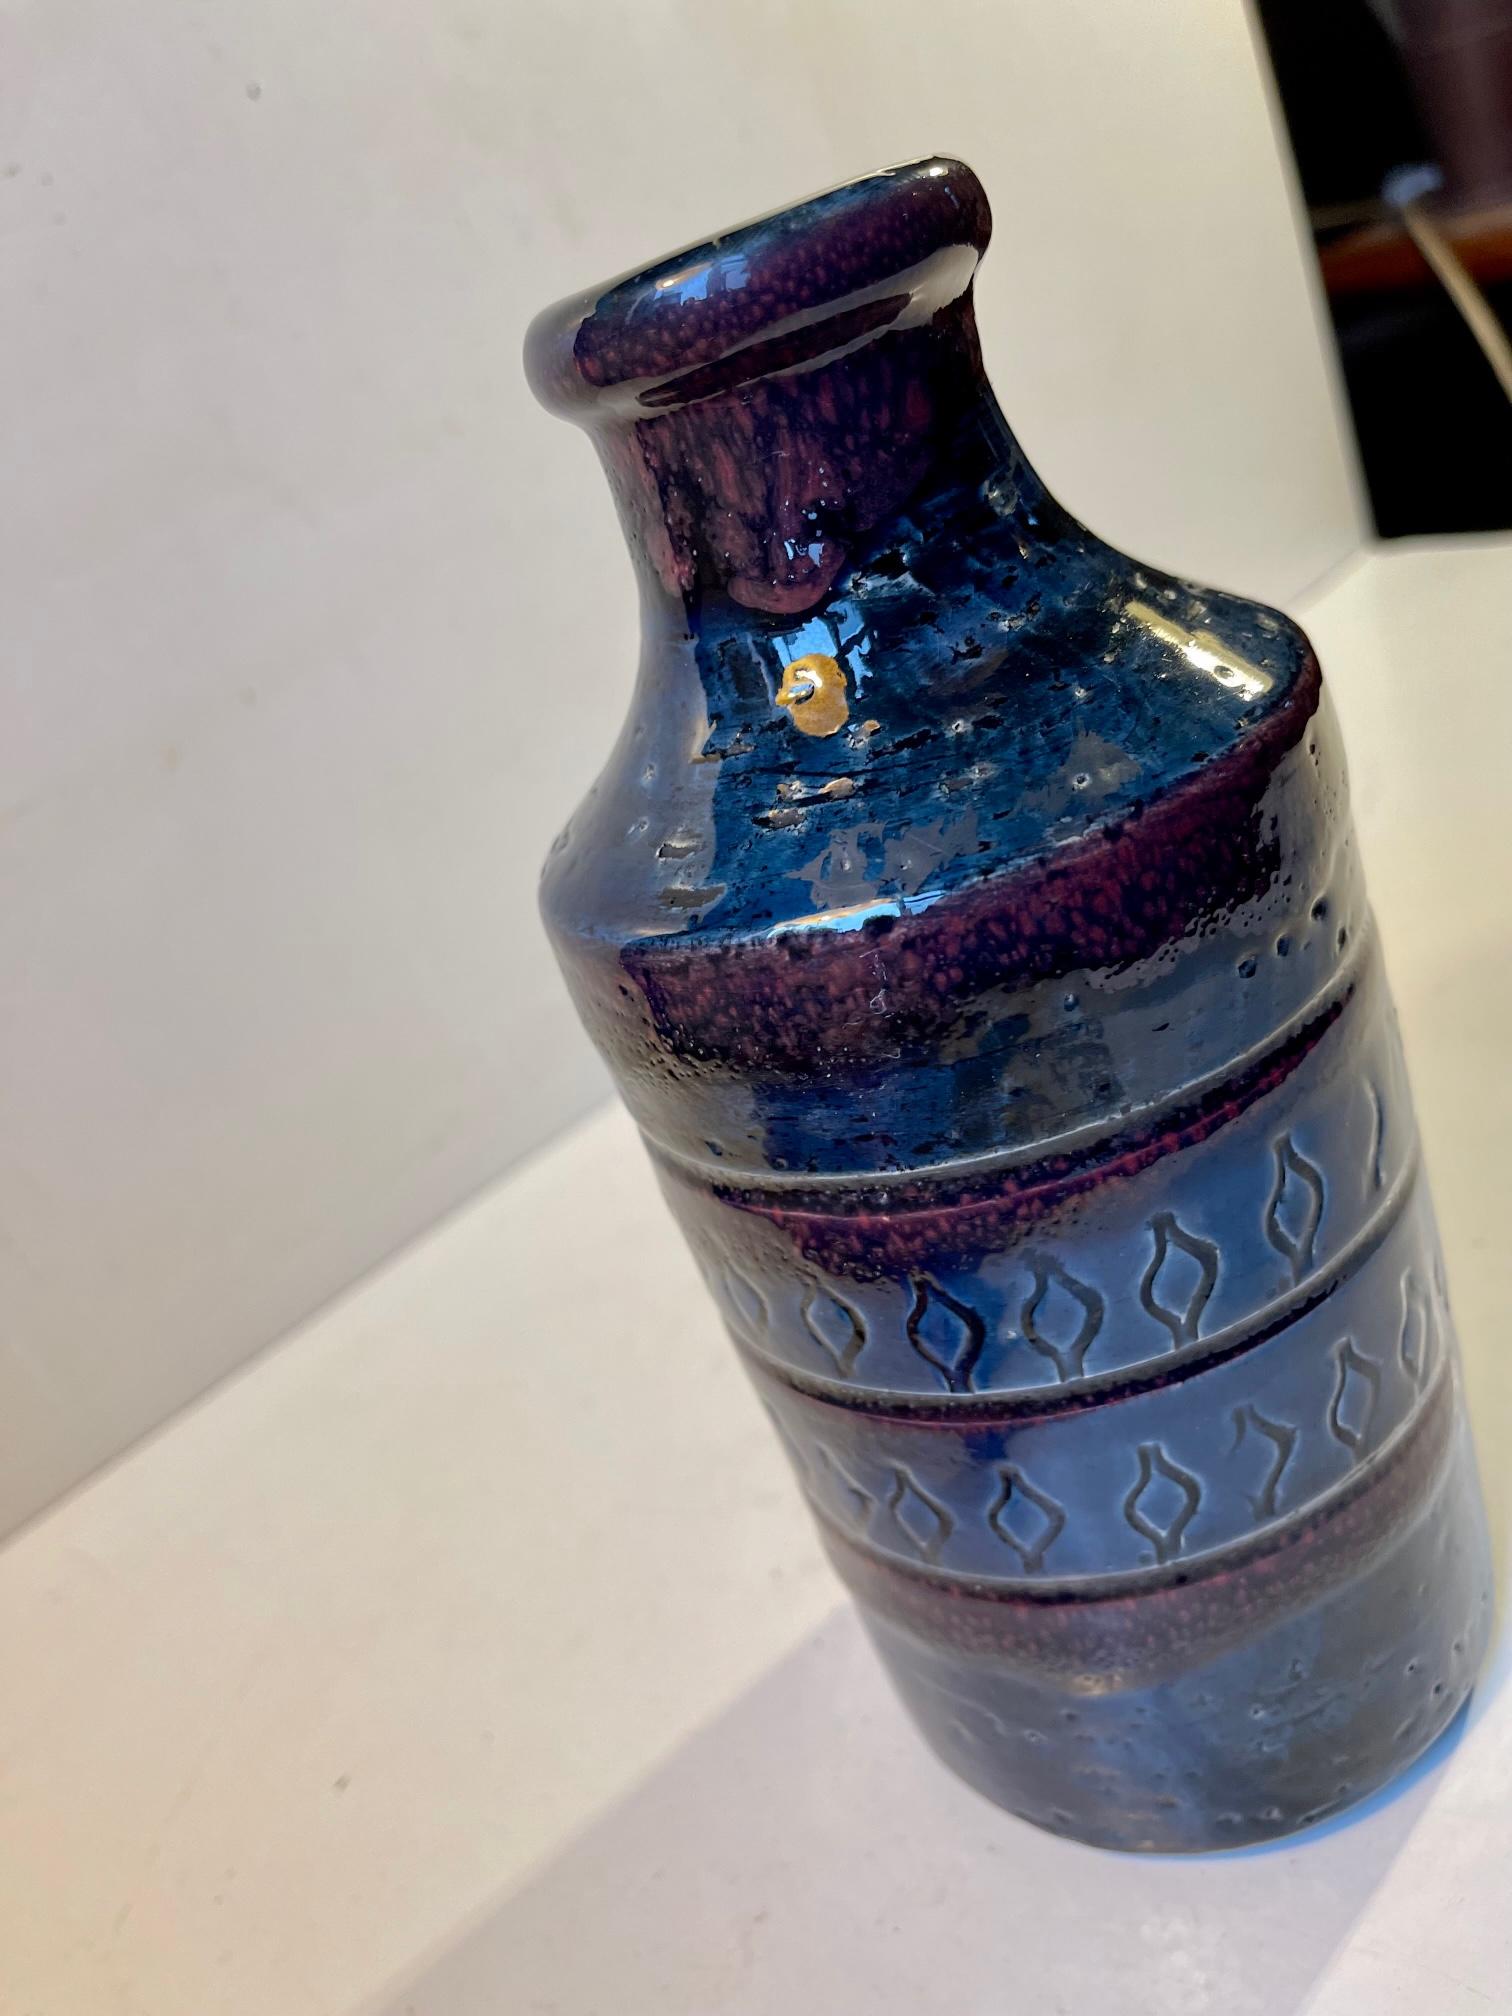 Mid-Century Modern Italian Stoneware Vase in Blue and Purple Glaze from Bitossi, 1960s For Sale